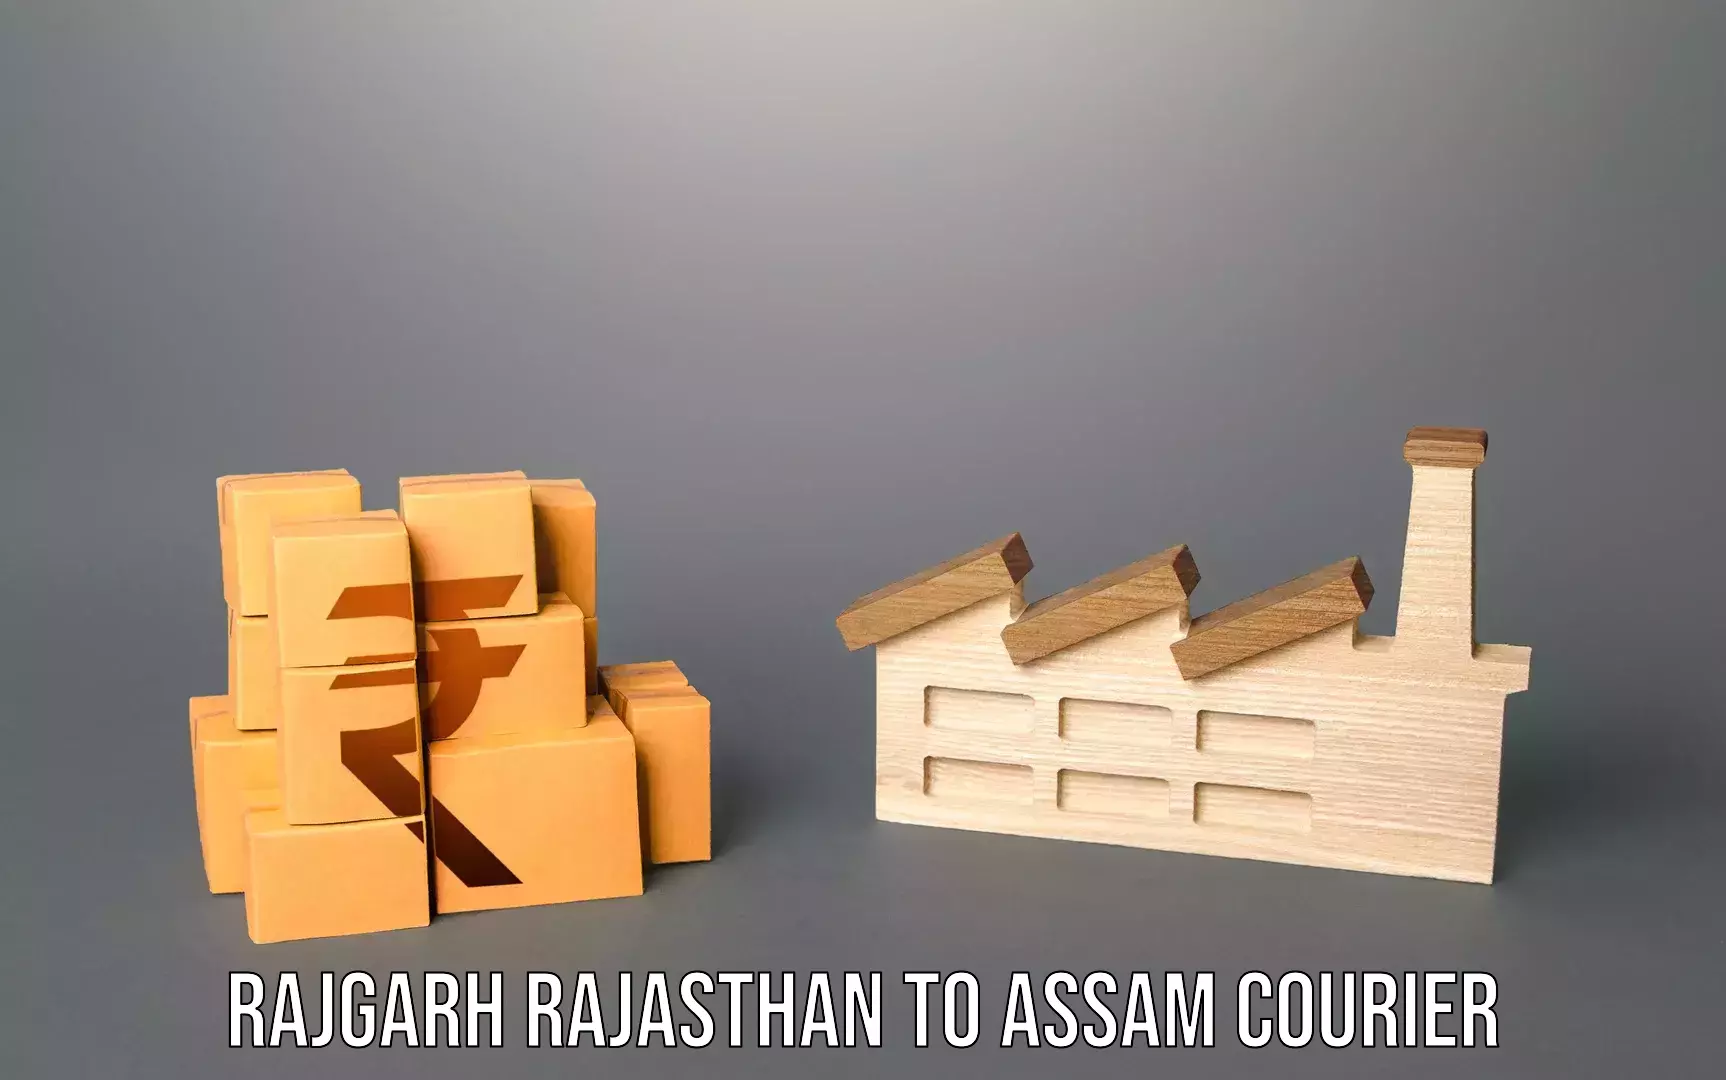 High-quality baggage shipment in Rajgarh Rajasthan to Assam